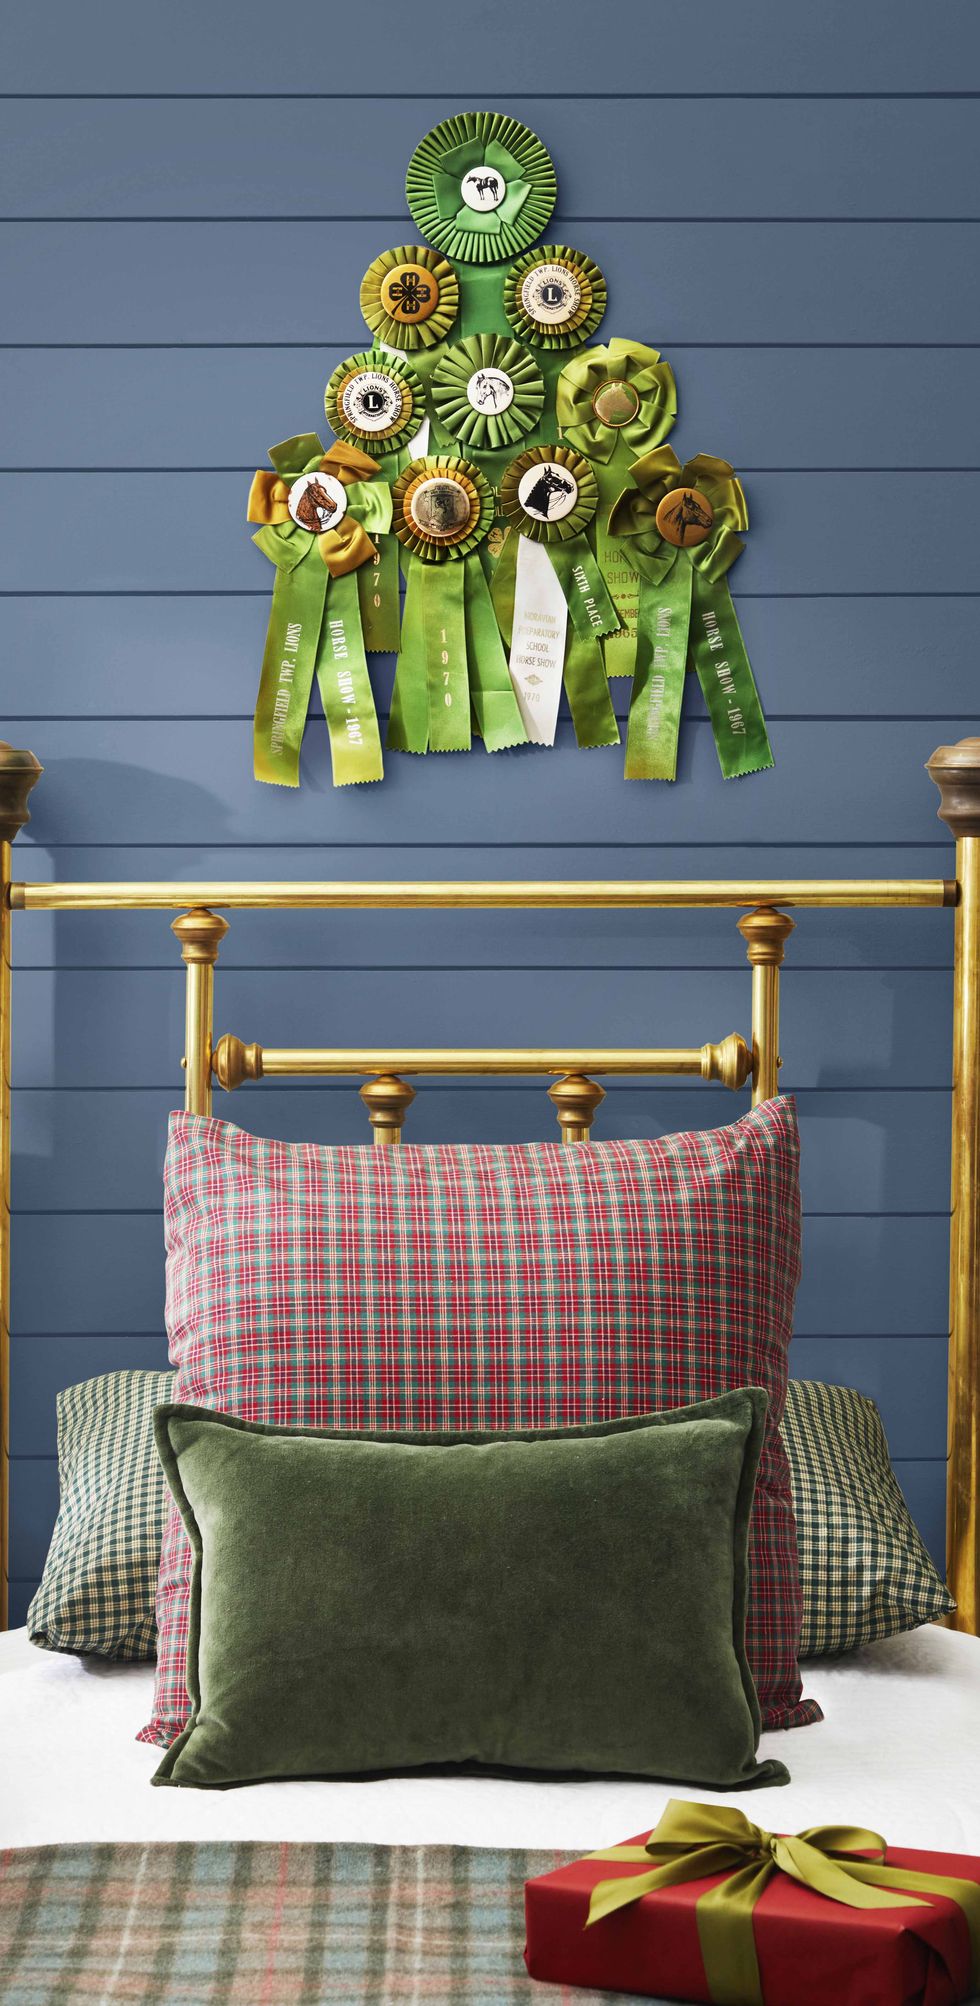 green prize ribbon hung in the shape of a christmas tree on the wall above a brass bed